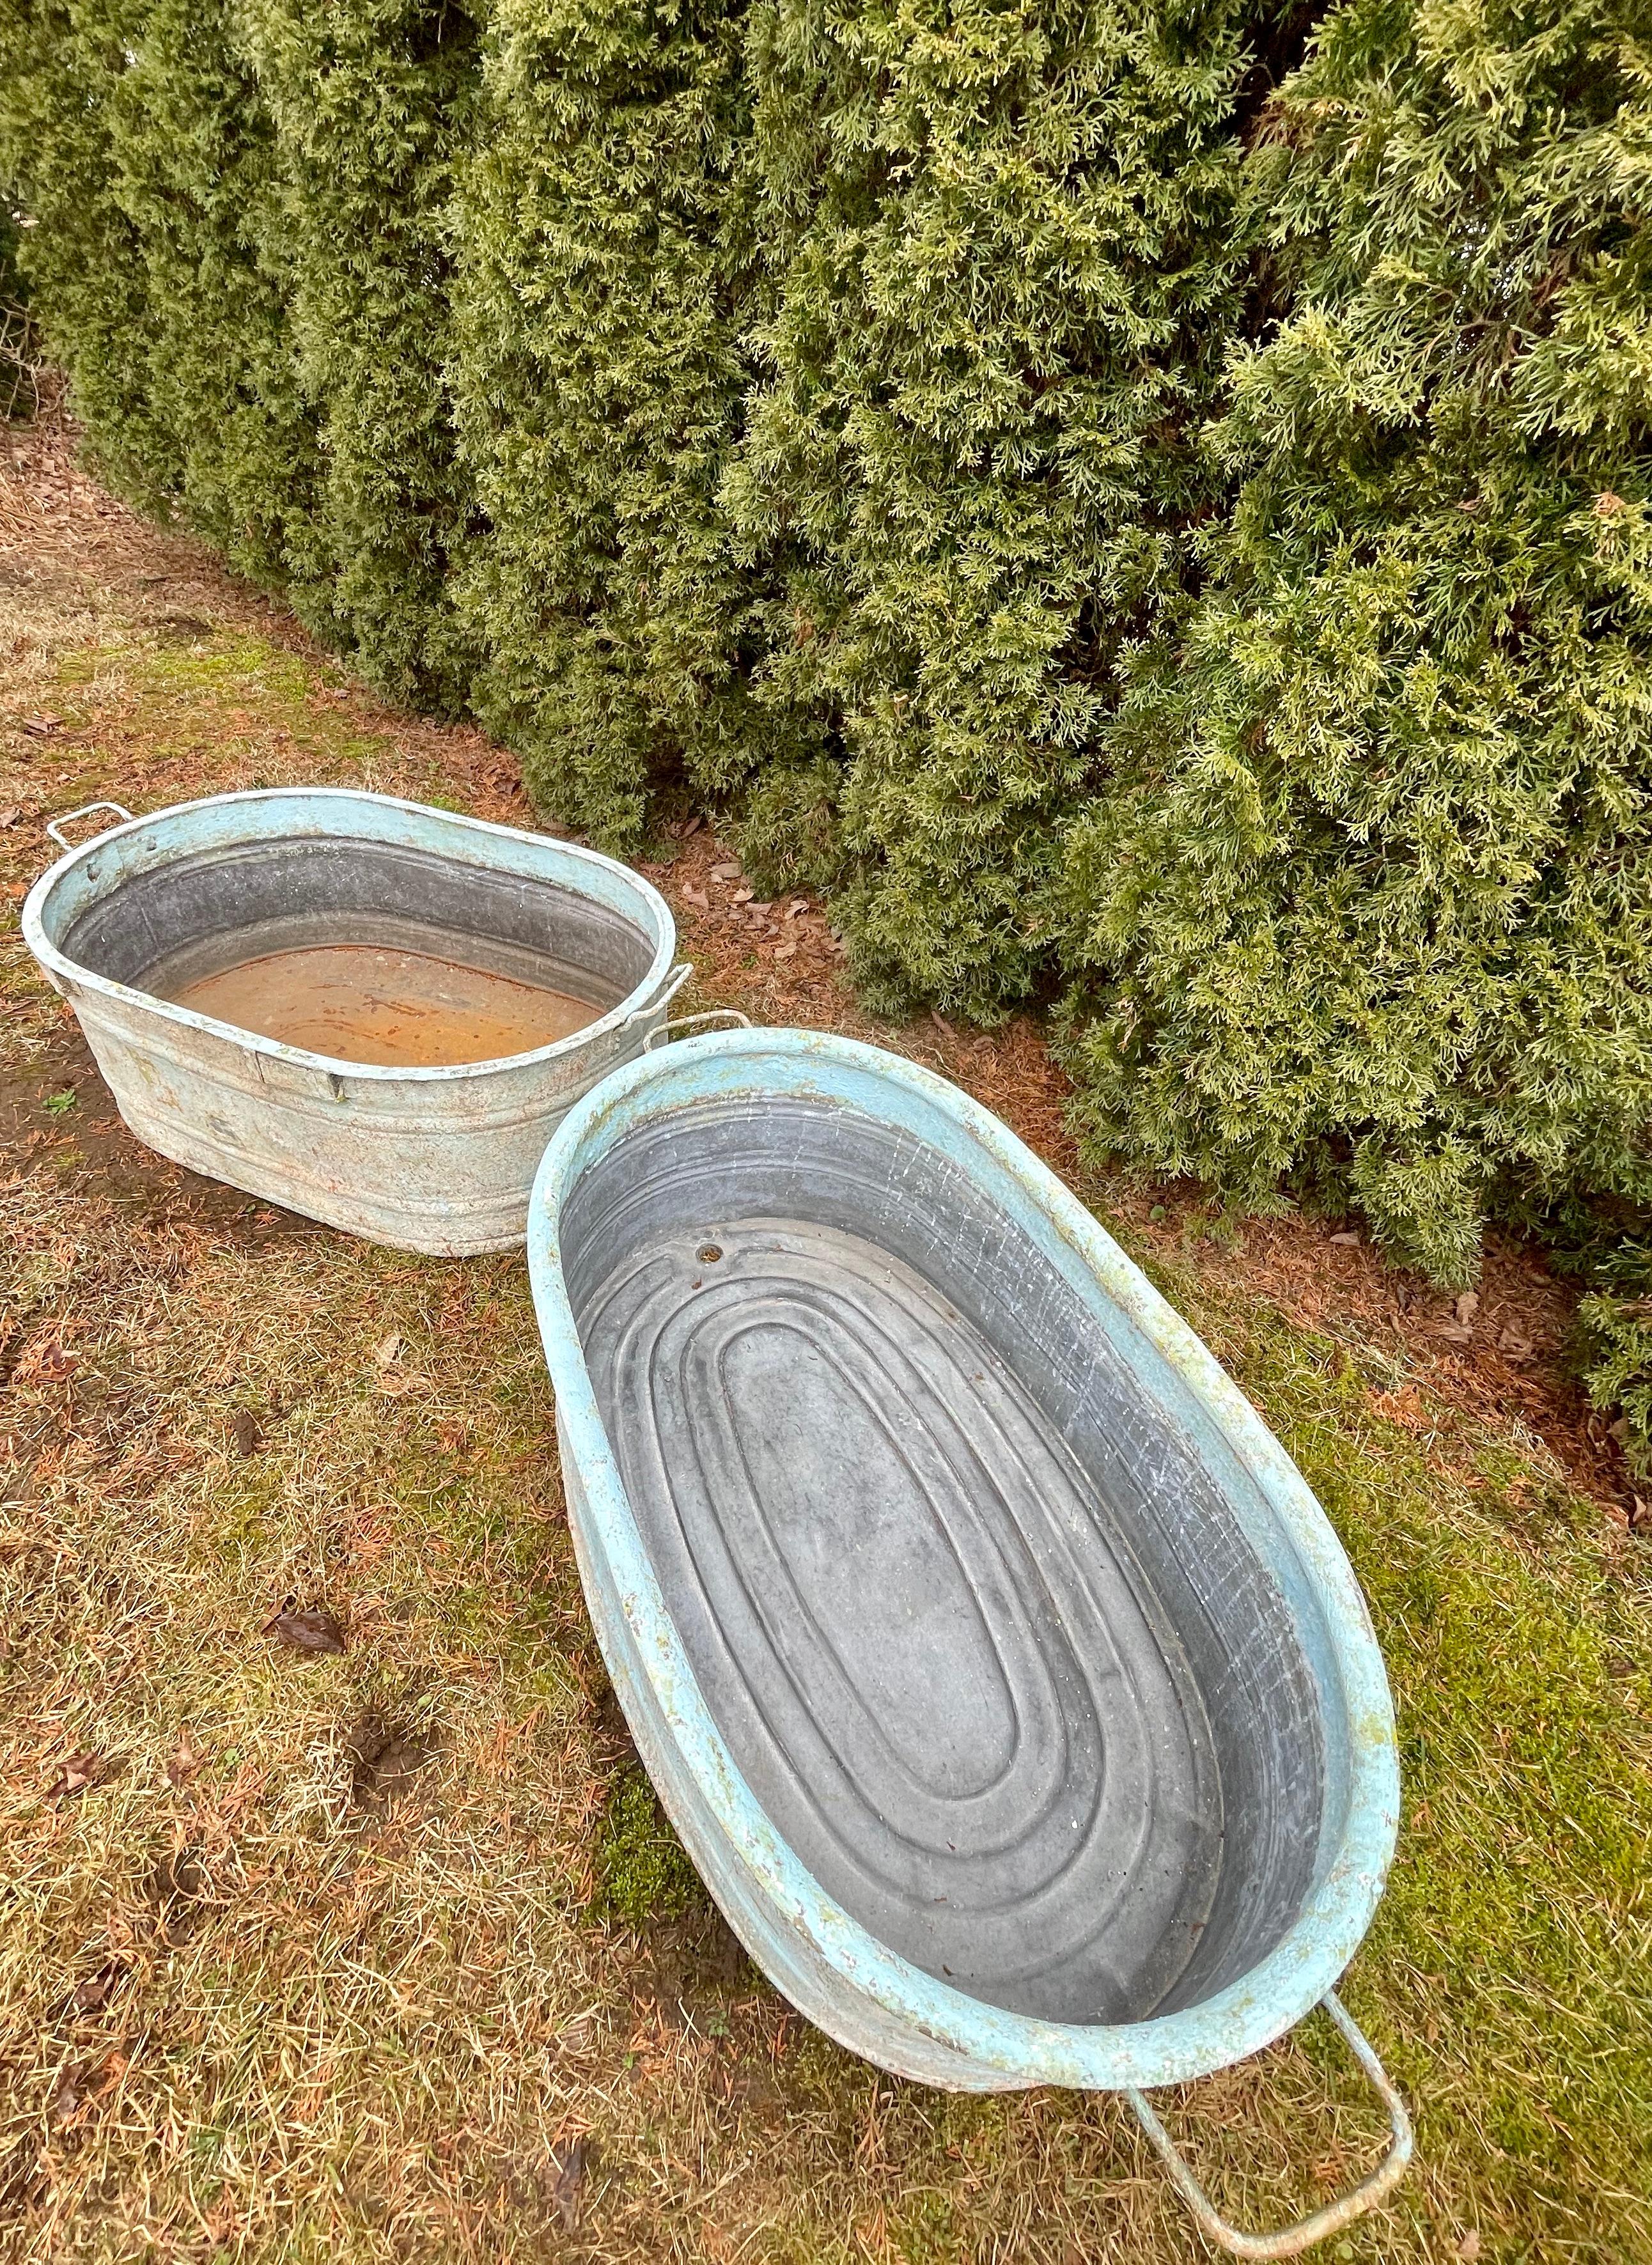 20th Century Near-Pair of Very Large German Oval Galvanized Planters #2 with Custom Surface For Sale